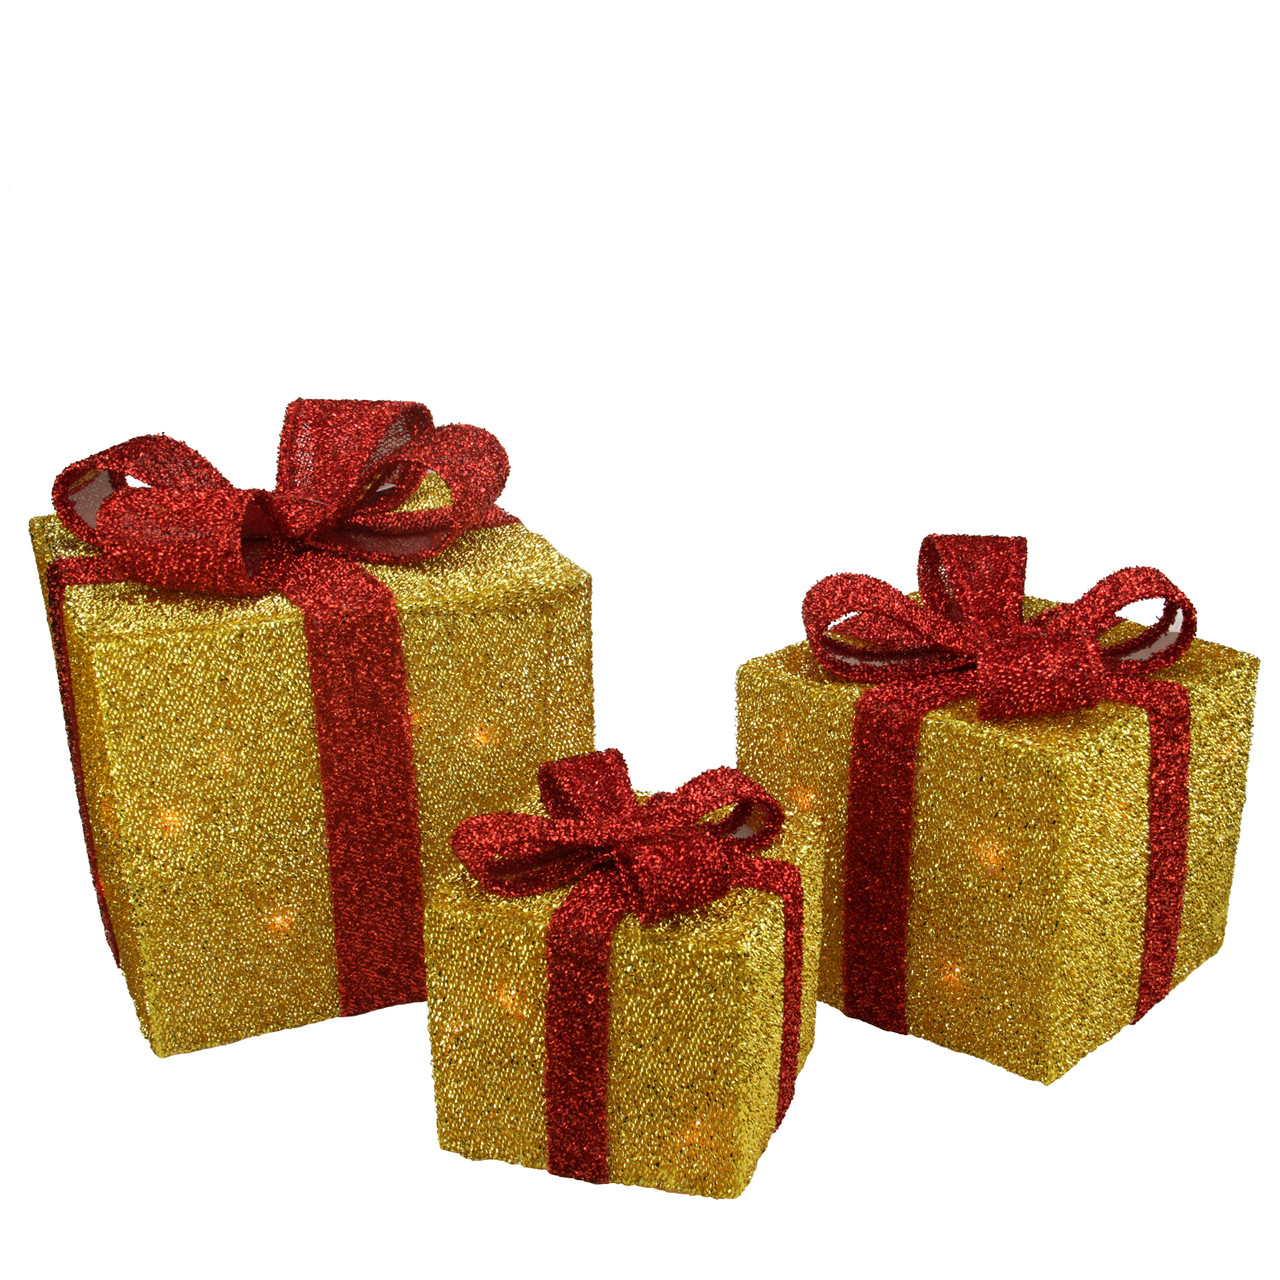 Set of 3 Lighted Green Gift Boxes with Red Bows Outdoor Christmas